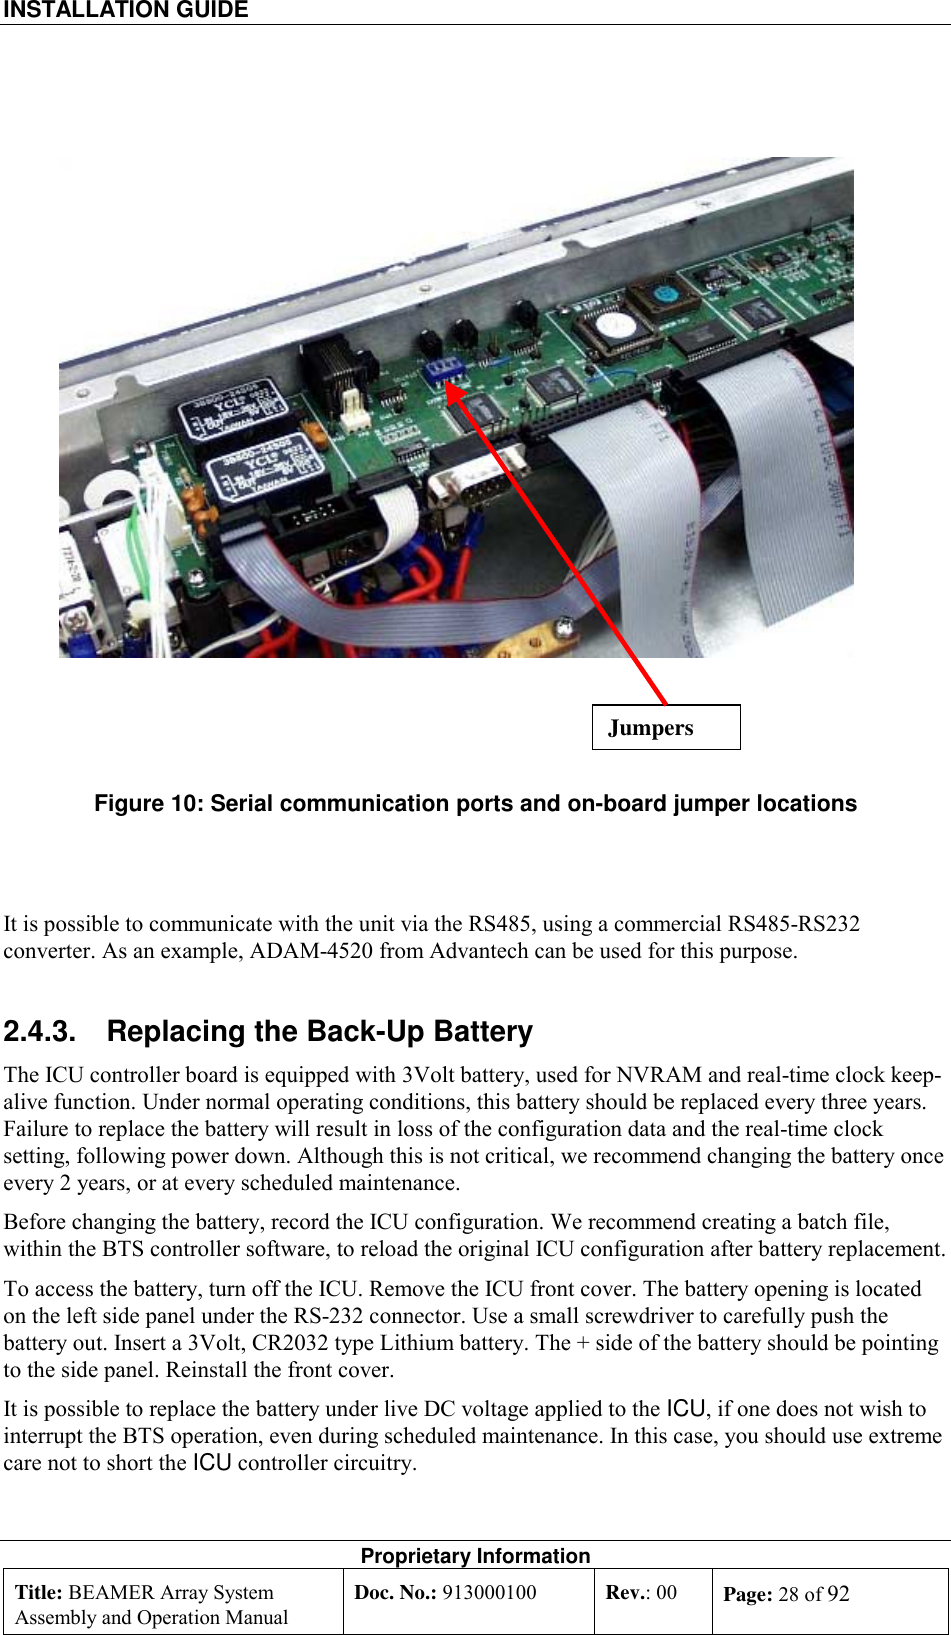 INSTALLATION GUIDE    Proprietary Information Title: BEAMER Array System Assembly and Operation Manual Doc. No.: 913000100  Rev.: 00  Page: 28 of 92    Figure 10: Serial communication ports and on-board jumper locations   It is possible to communicate with the unit via the RS485, using a commercial RS485-RS232 converter. As an example, ADAM-4520 from Advantech can be used for this purpose. 2.4.3.  Replacing the Back-Up Battery The ICU controller board is equipped with 3Volt battery, used for NVRAM and real-time clock keep-alive function. Under normal operating conditions, this battery should be replaced every three years. Failure to replace the battery will result in loss of the configuration data and the real-time clock setting, following power down. Although this is not critical, we recommend changing the battery once every 2 years, or at every scheduled maintenance. Before changing the battery, record the ICU configuration. We recommend creating a batch file, within the BTS controller software, to reload the original ICU configuration after battery replacement. To access the battery, turn off the ICU. Remove the ICU front cover. The battery opening is located on the left side panel under the RS-232 connector. Use a small screwdriver to carefully push the battery out. Insert a 3Volt, CR2032 type Lithium battery. The + side of the battery should be pointing to the side panel. Reinstall the front cover. It is possible to replace the battery under live DC voltage applied to the ICU, if one does not wish to interrupt the BTS operation, even during scheduled maintenance. In this case, you should use extreme care not to short the ICU controller circuitry. Jumpers 